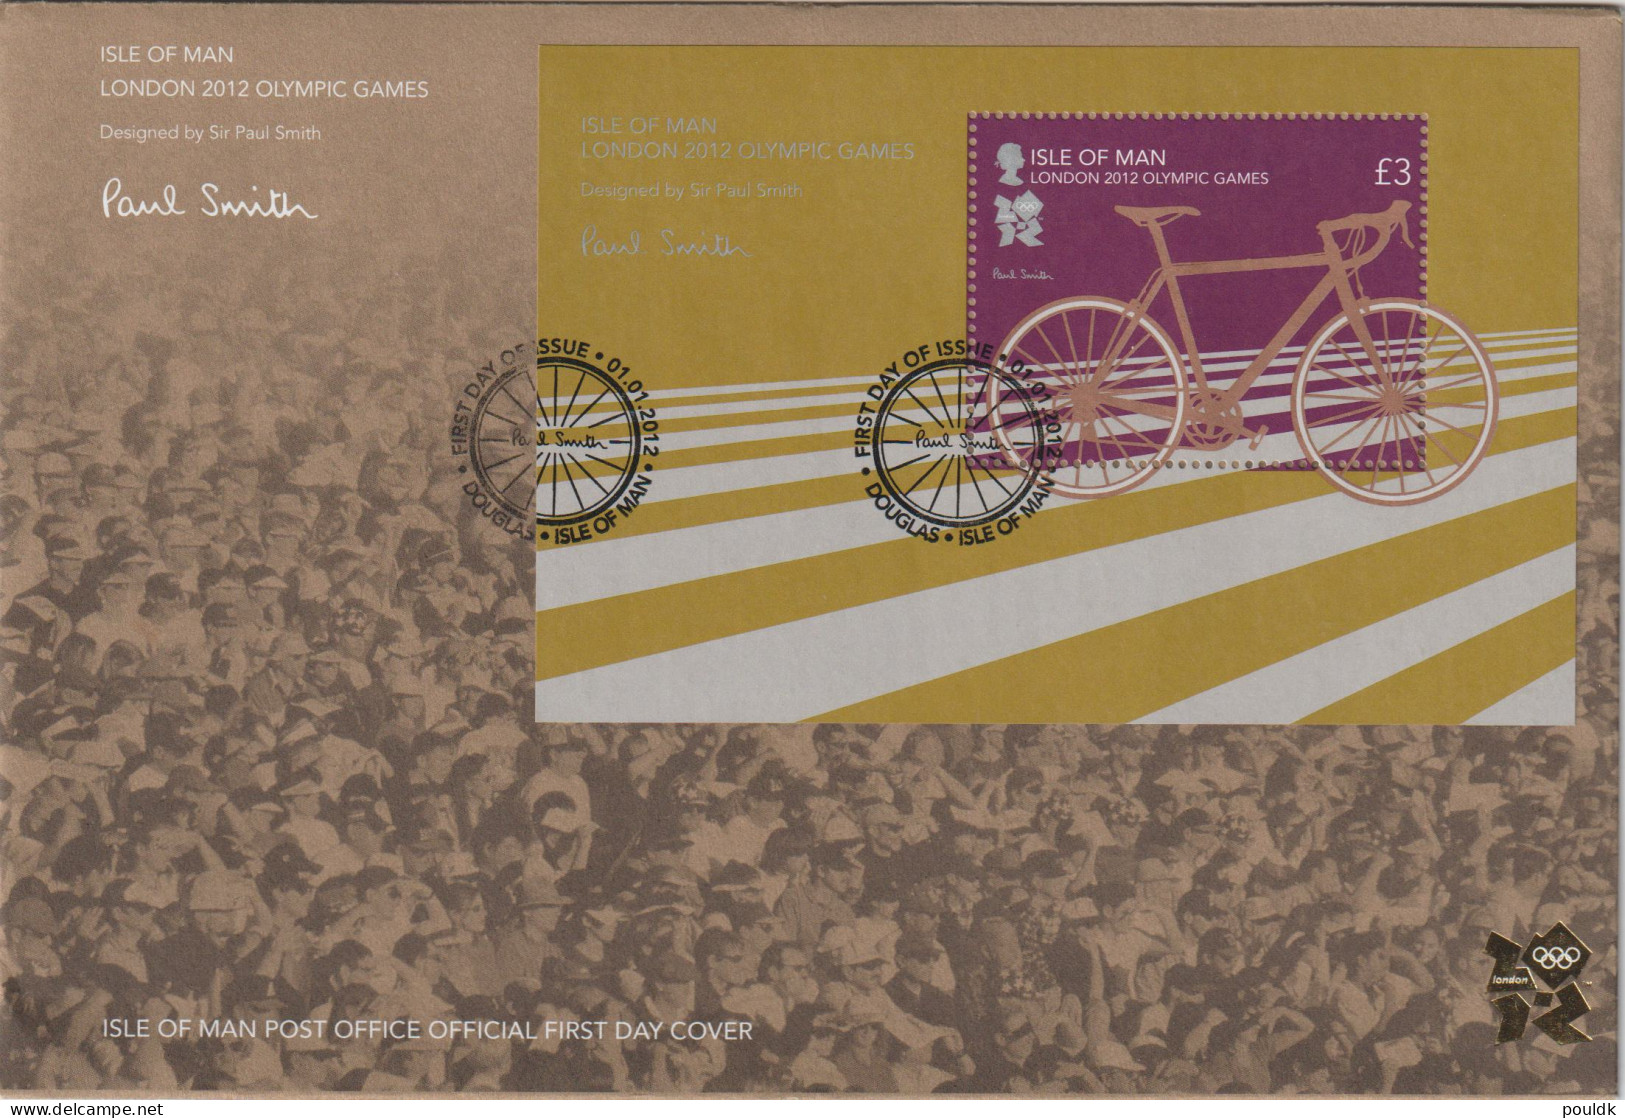 Isle Of Man 2012 Olympic Games London Souvenir Sheet FDC. Weight 0,04 Kg. Please Read Sales Conditions Under - Sommer 2012: London